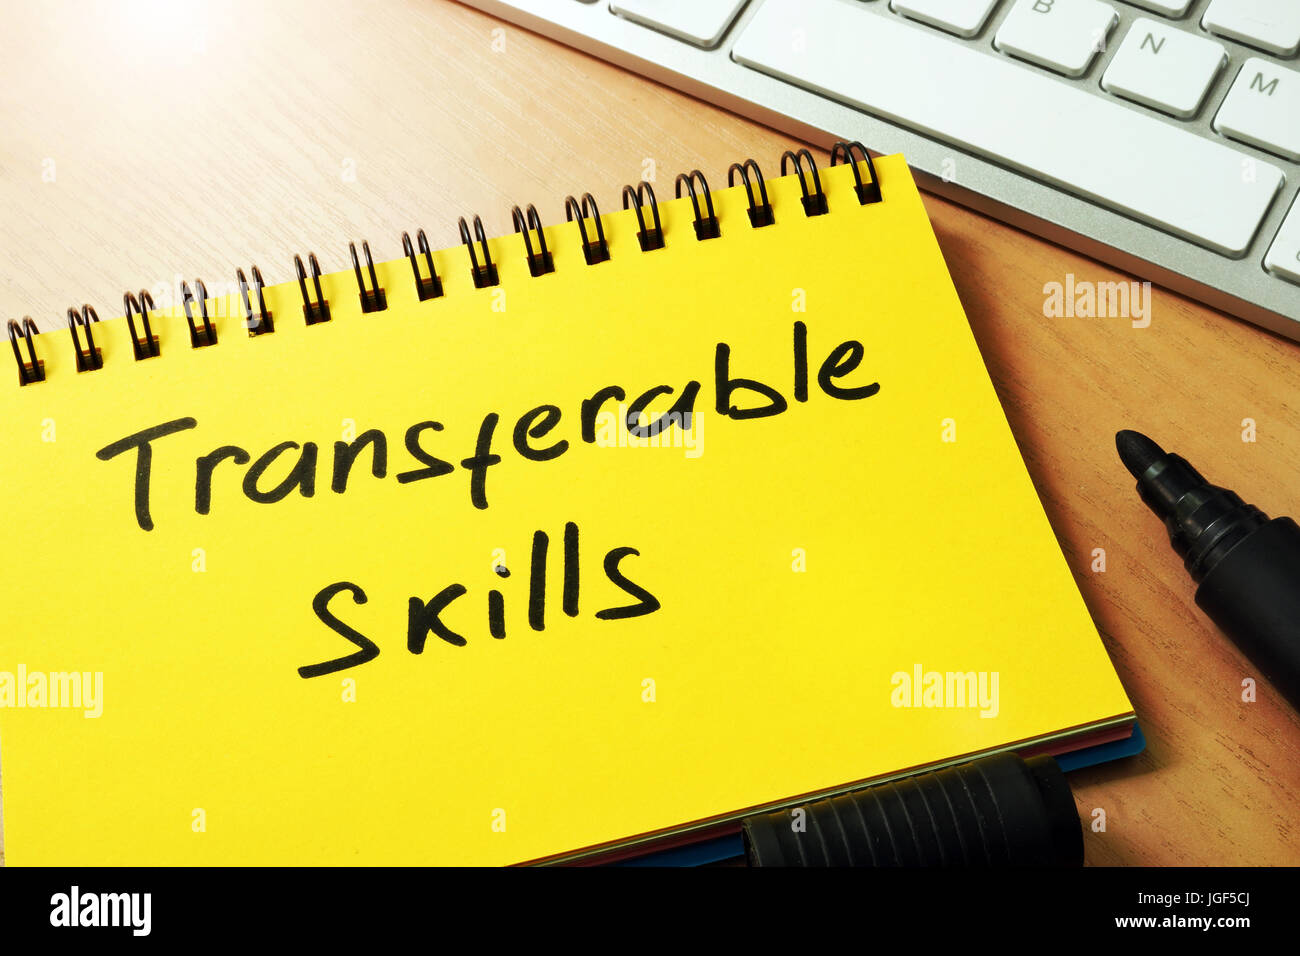 Transferable skills written on a page of notepad. Stock Photo